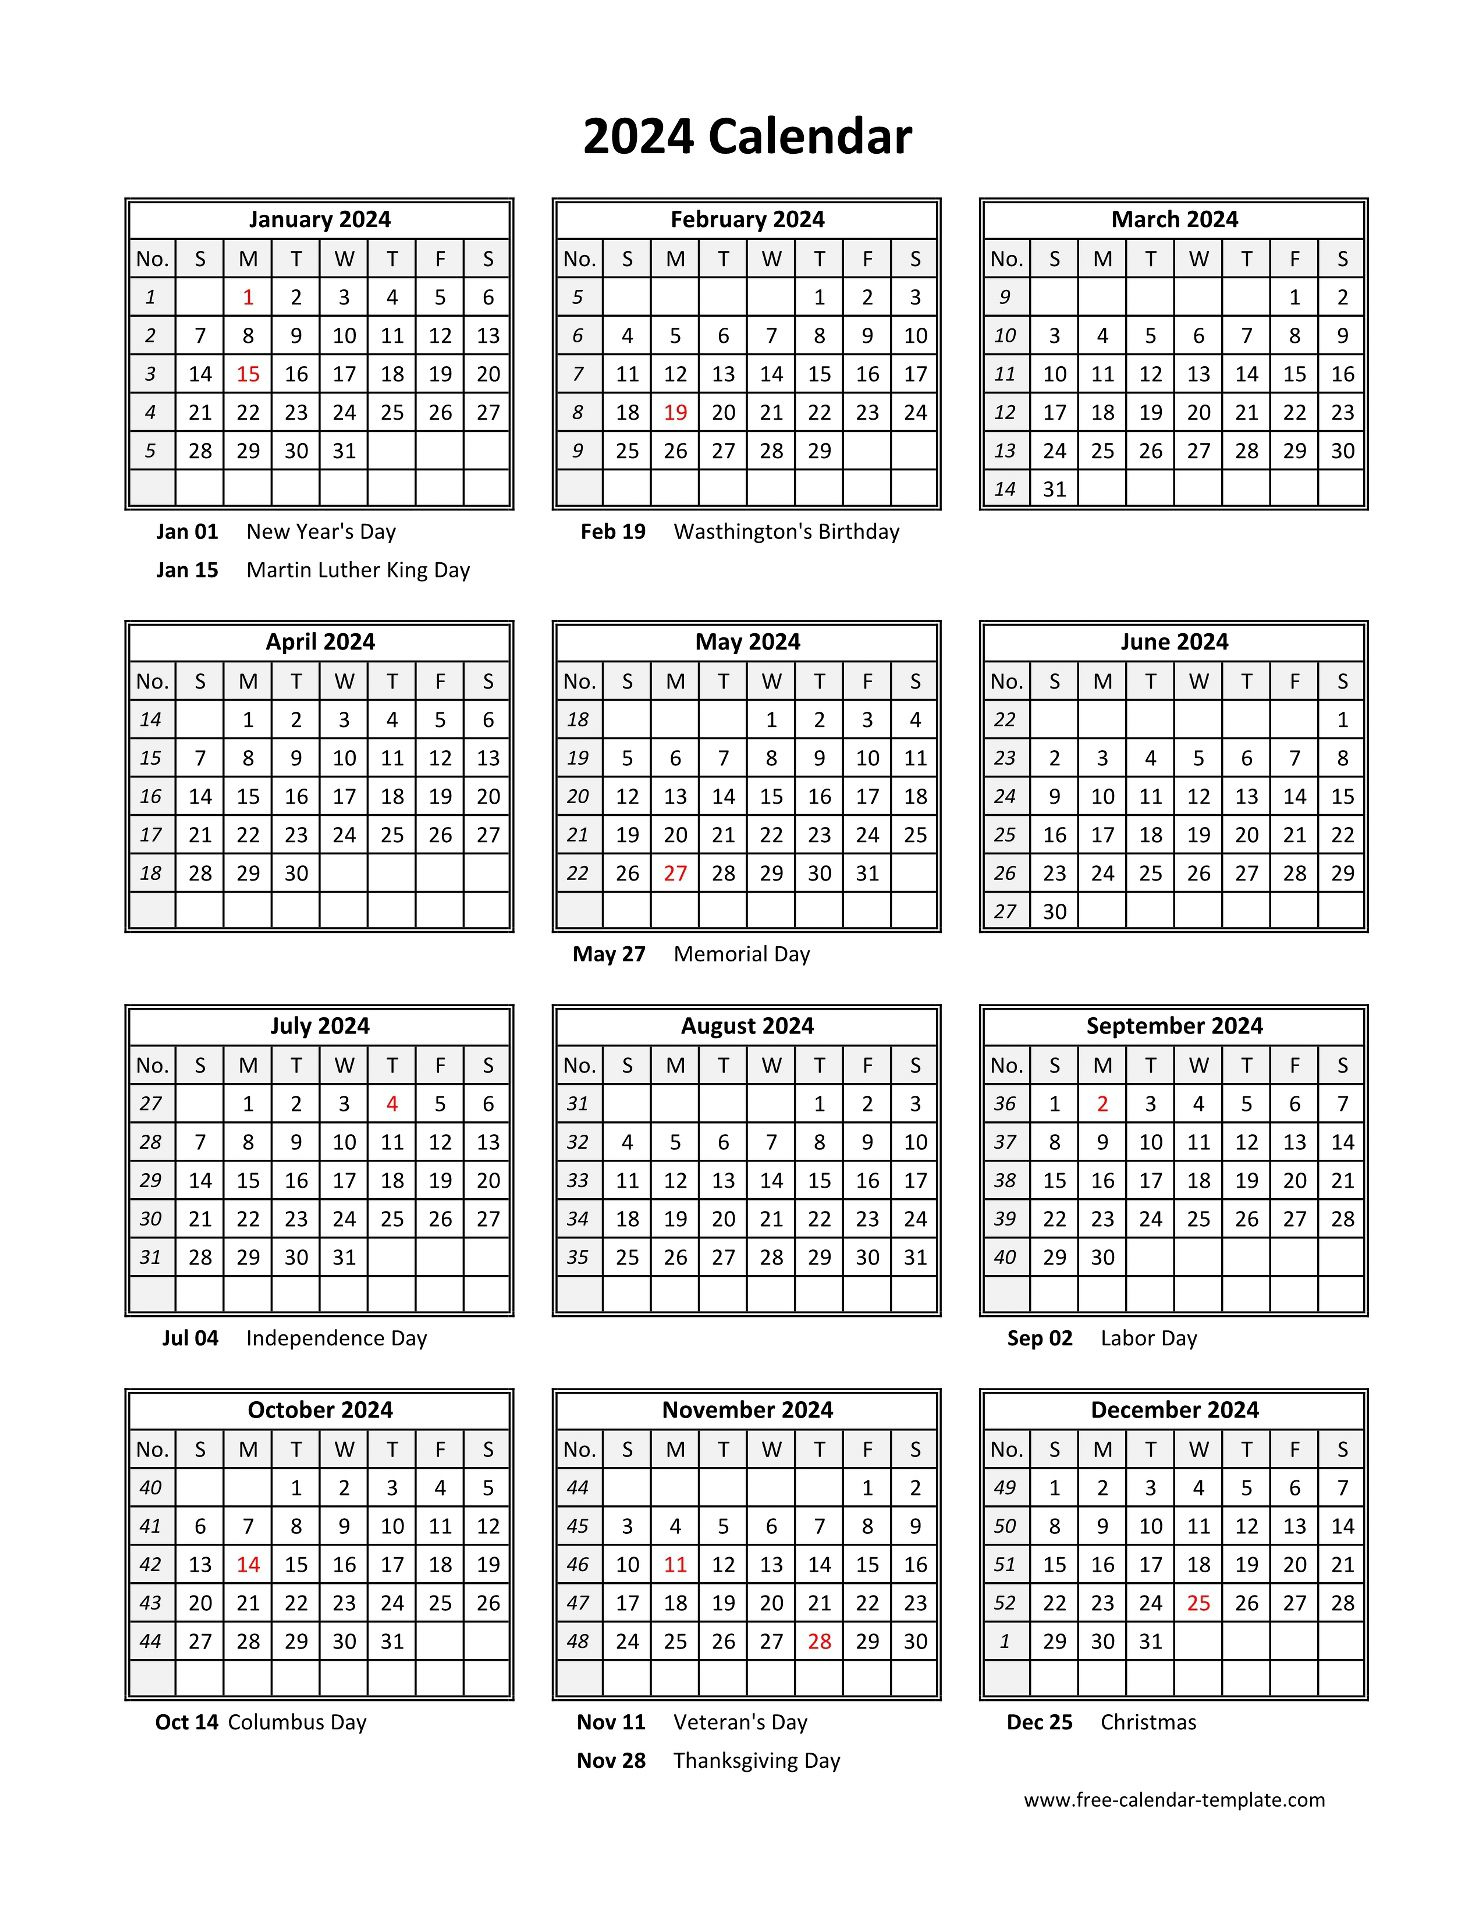 Yearly Printable Calendar 2024 With Holidays | Free-Calendar | Yearly Calendar 2024 Printable Free